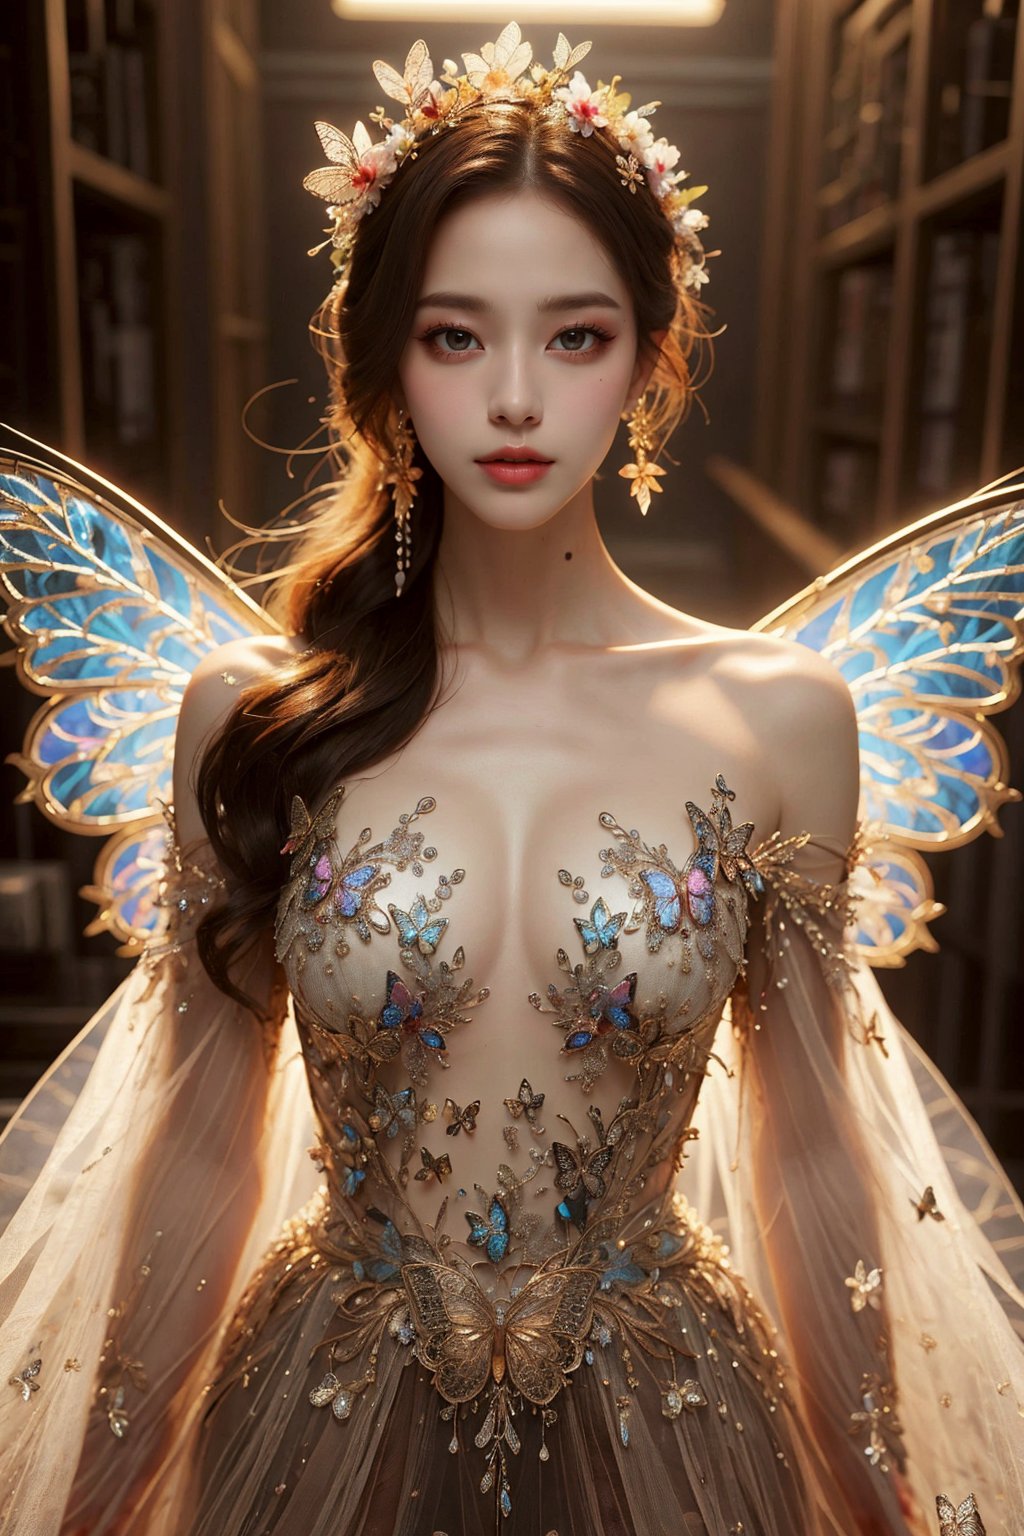 busty and sexy girl, 8k, masterpiece, ultra-realistic, best quality, high resolution, high definition, Glowing butterfly wings, PRINCESS DRESS,GBG